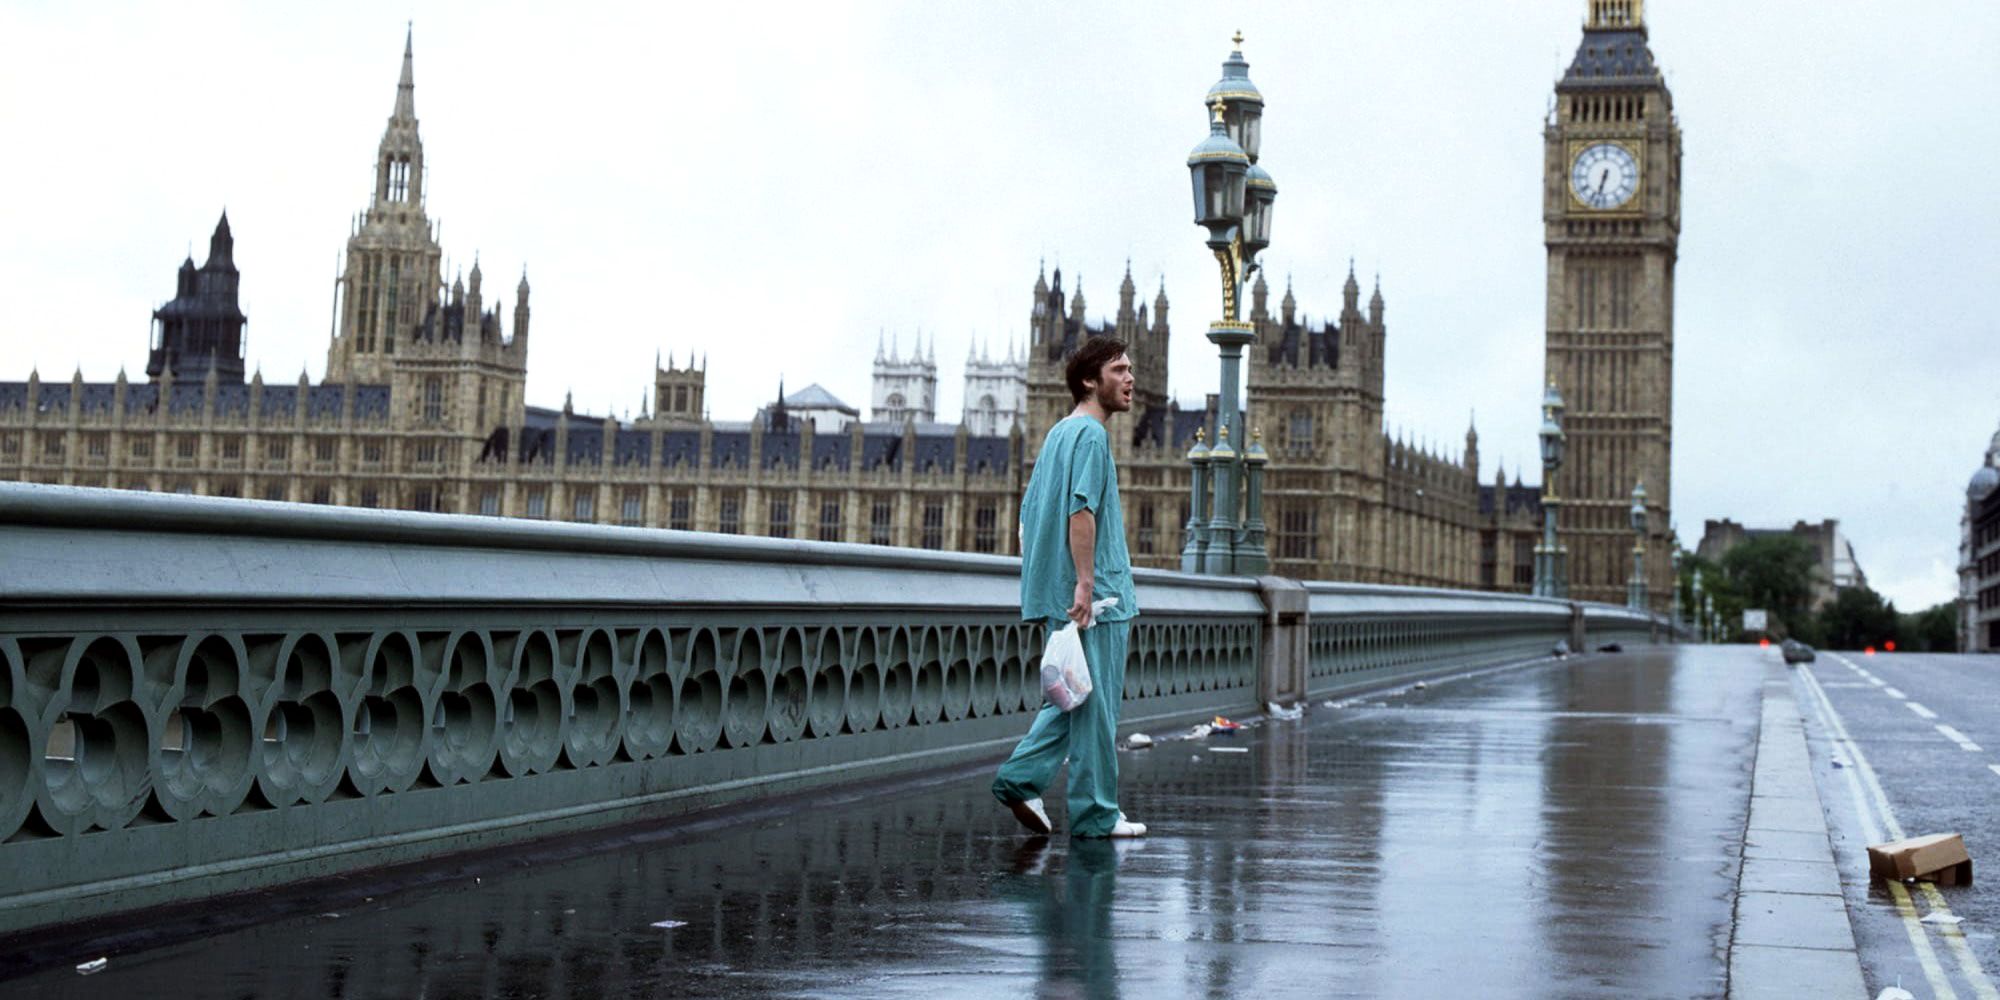 London in 28 Days Later.